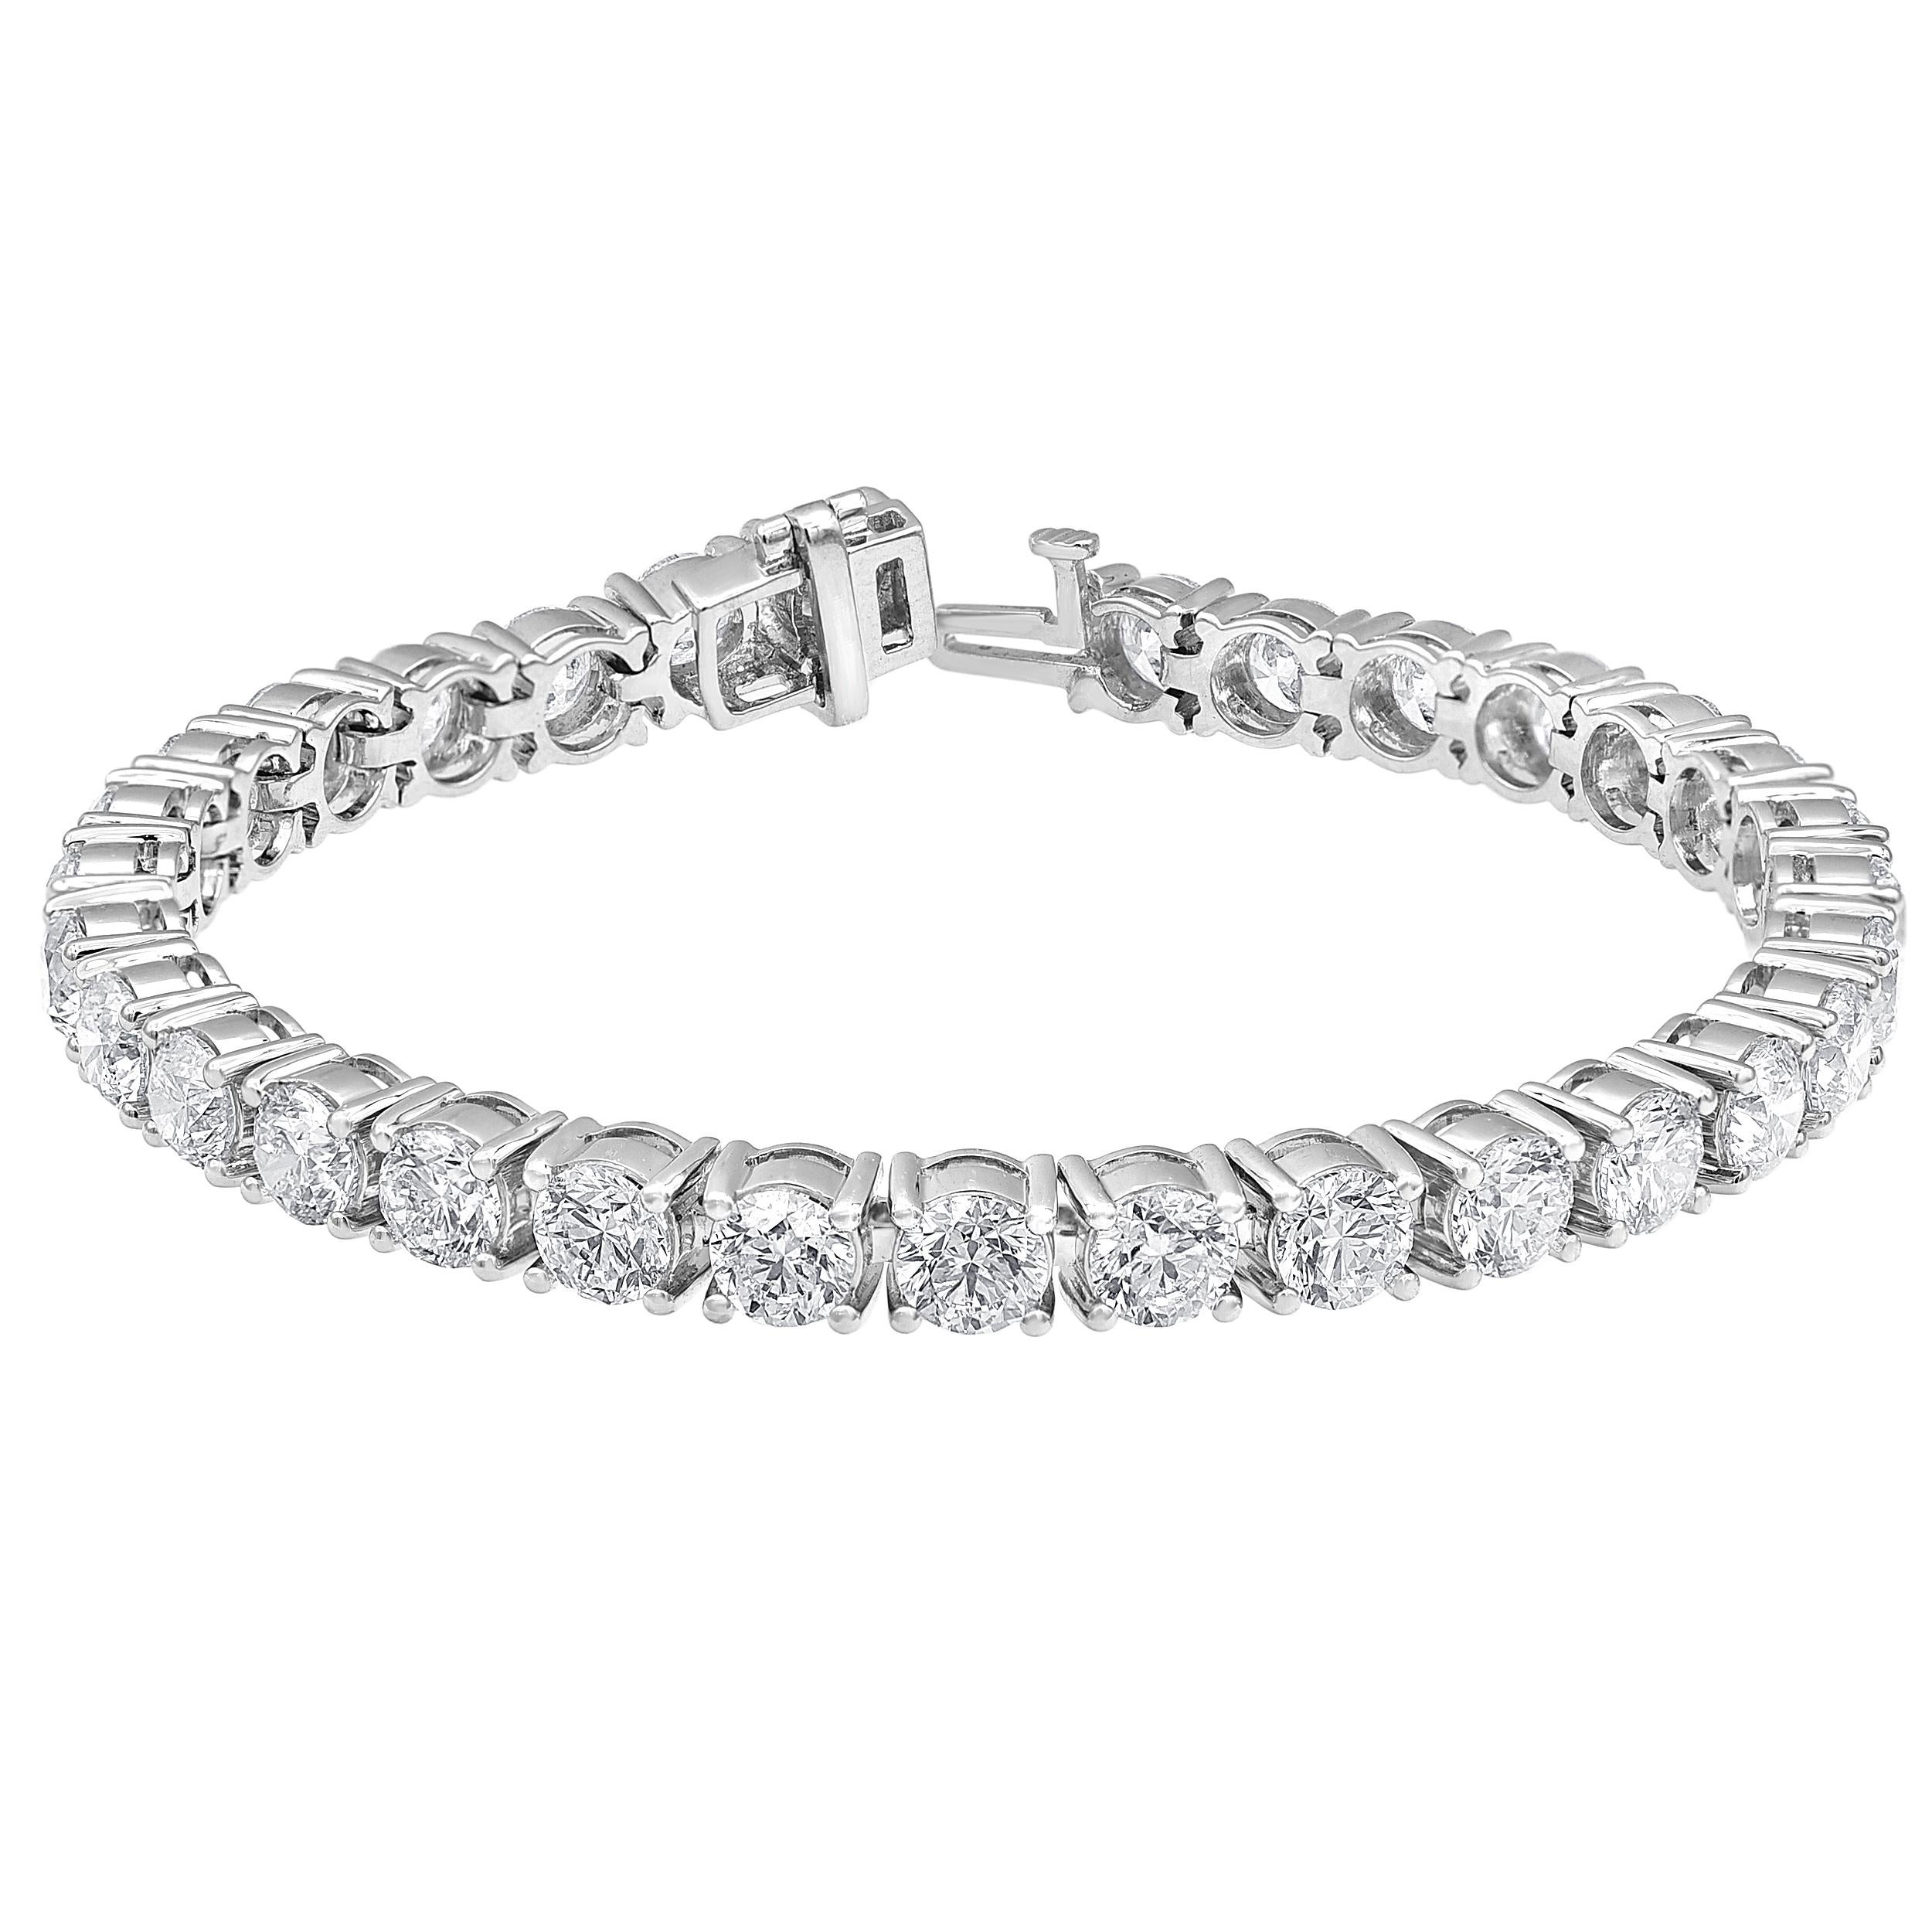 You'll admire the classic anytime style of this stunning diamond tennis bracelet. Crafted in cool 14K white gold, this look showcases a row of dazzling 1.50 ct. each diamonds. Exquisite with 15.50 cts of diamonds and a bright polished shine, this